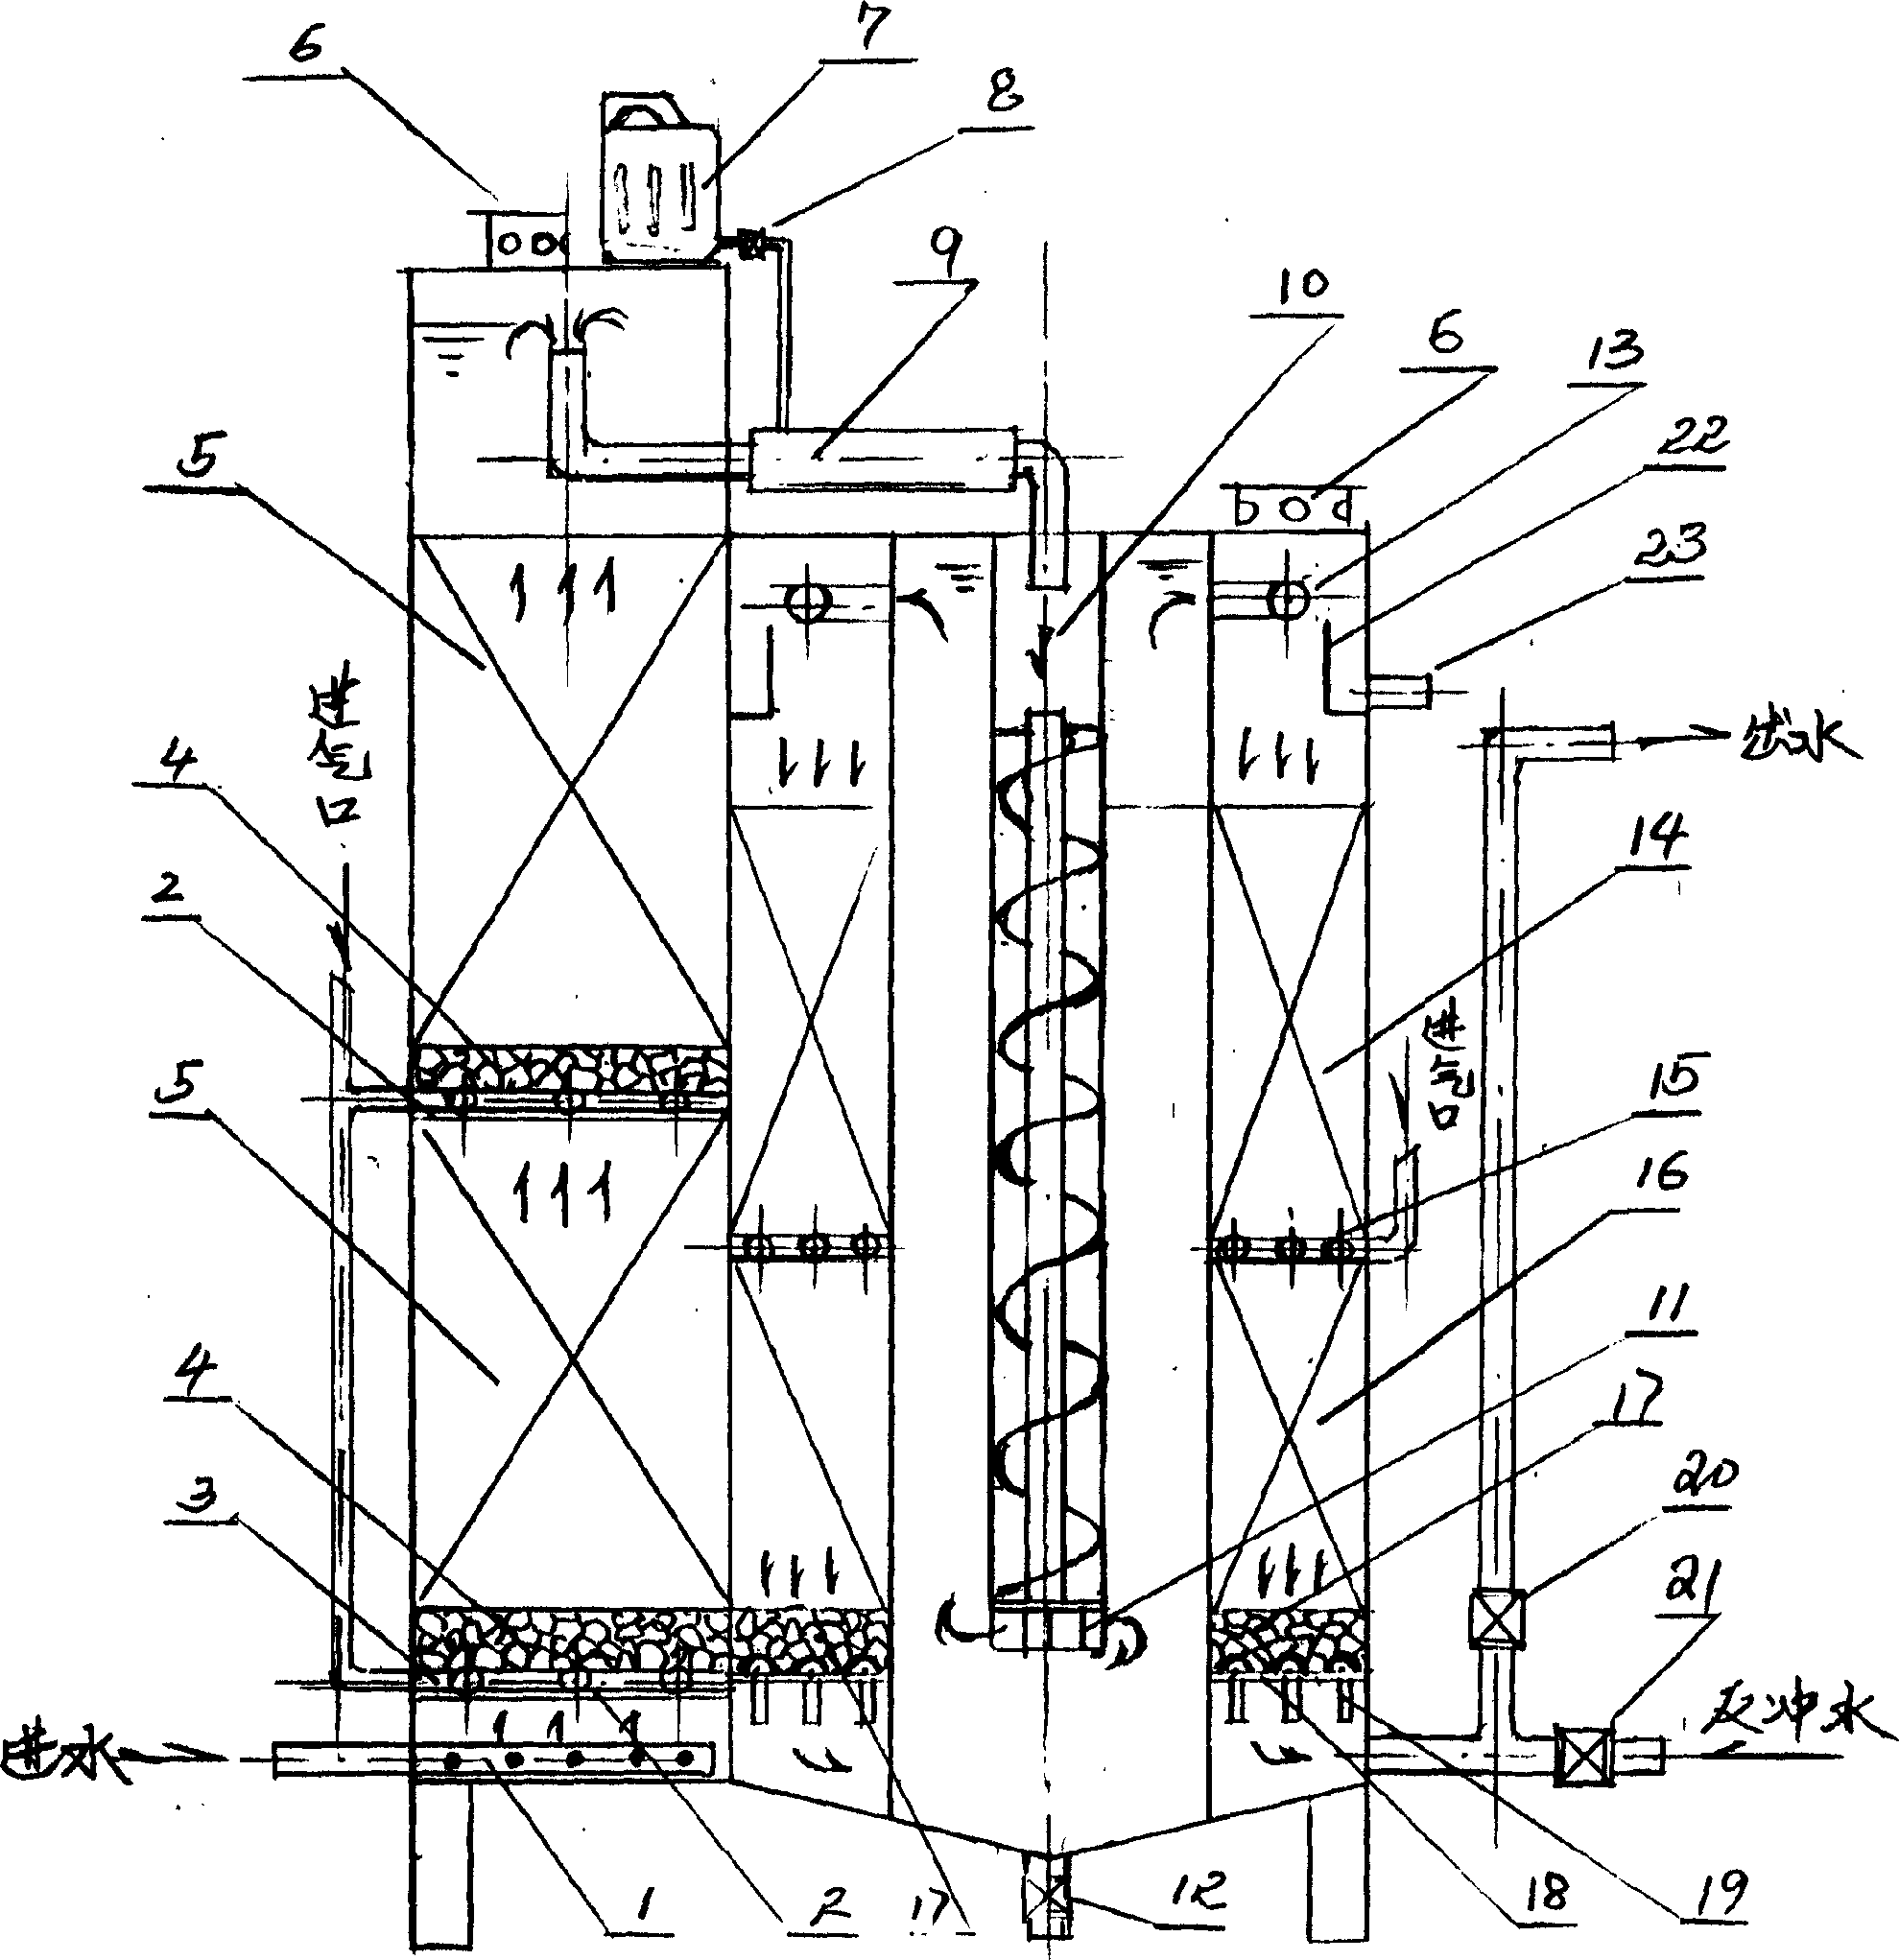 Integrated urban waste water treating apparatus and process